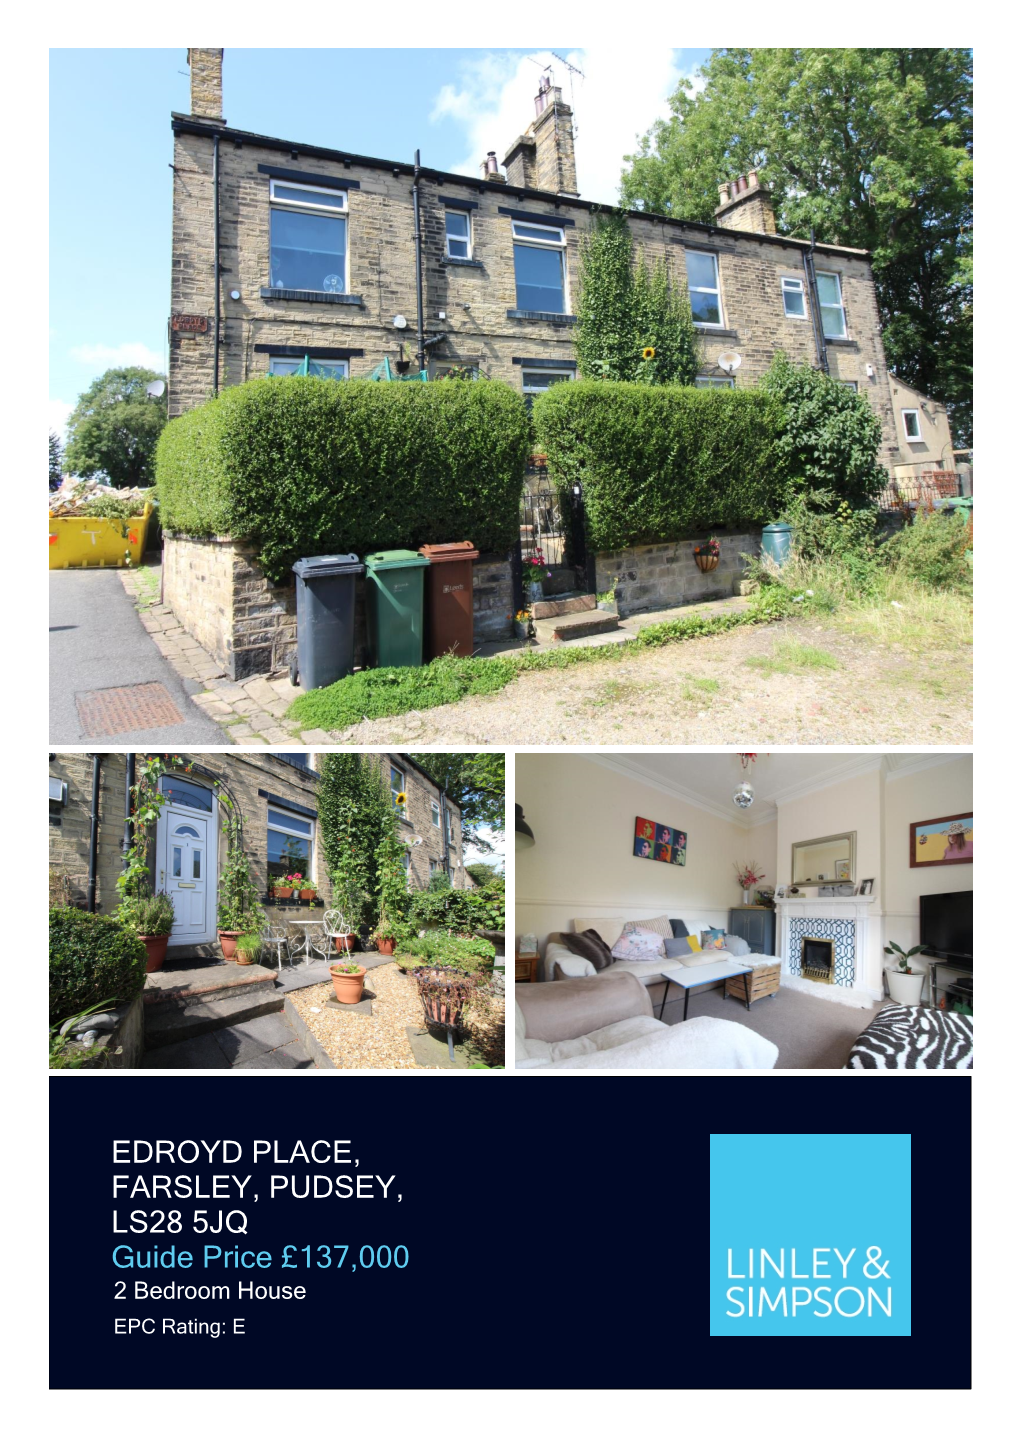 EDROYD PLACE, FARSLEY, PUDSEY, LS28 5JQ Guide Price